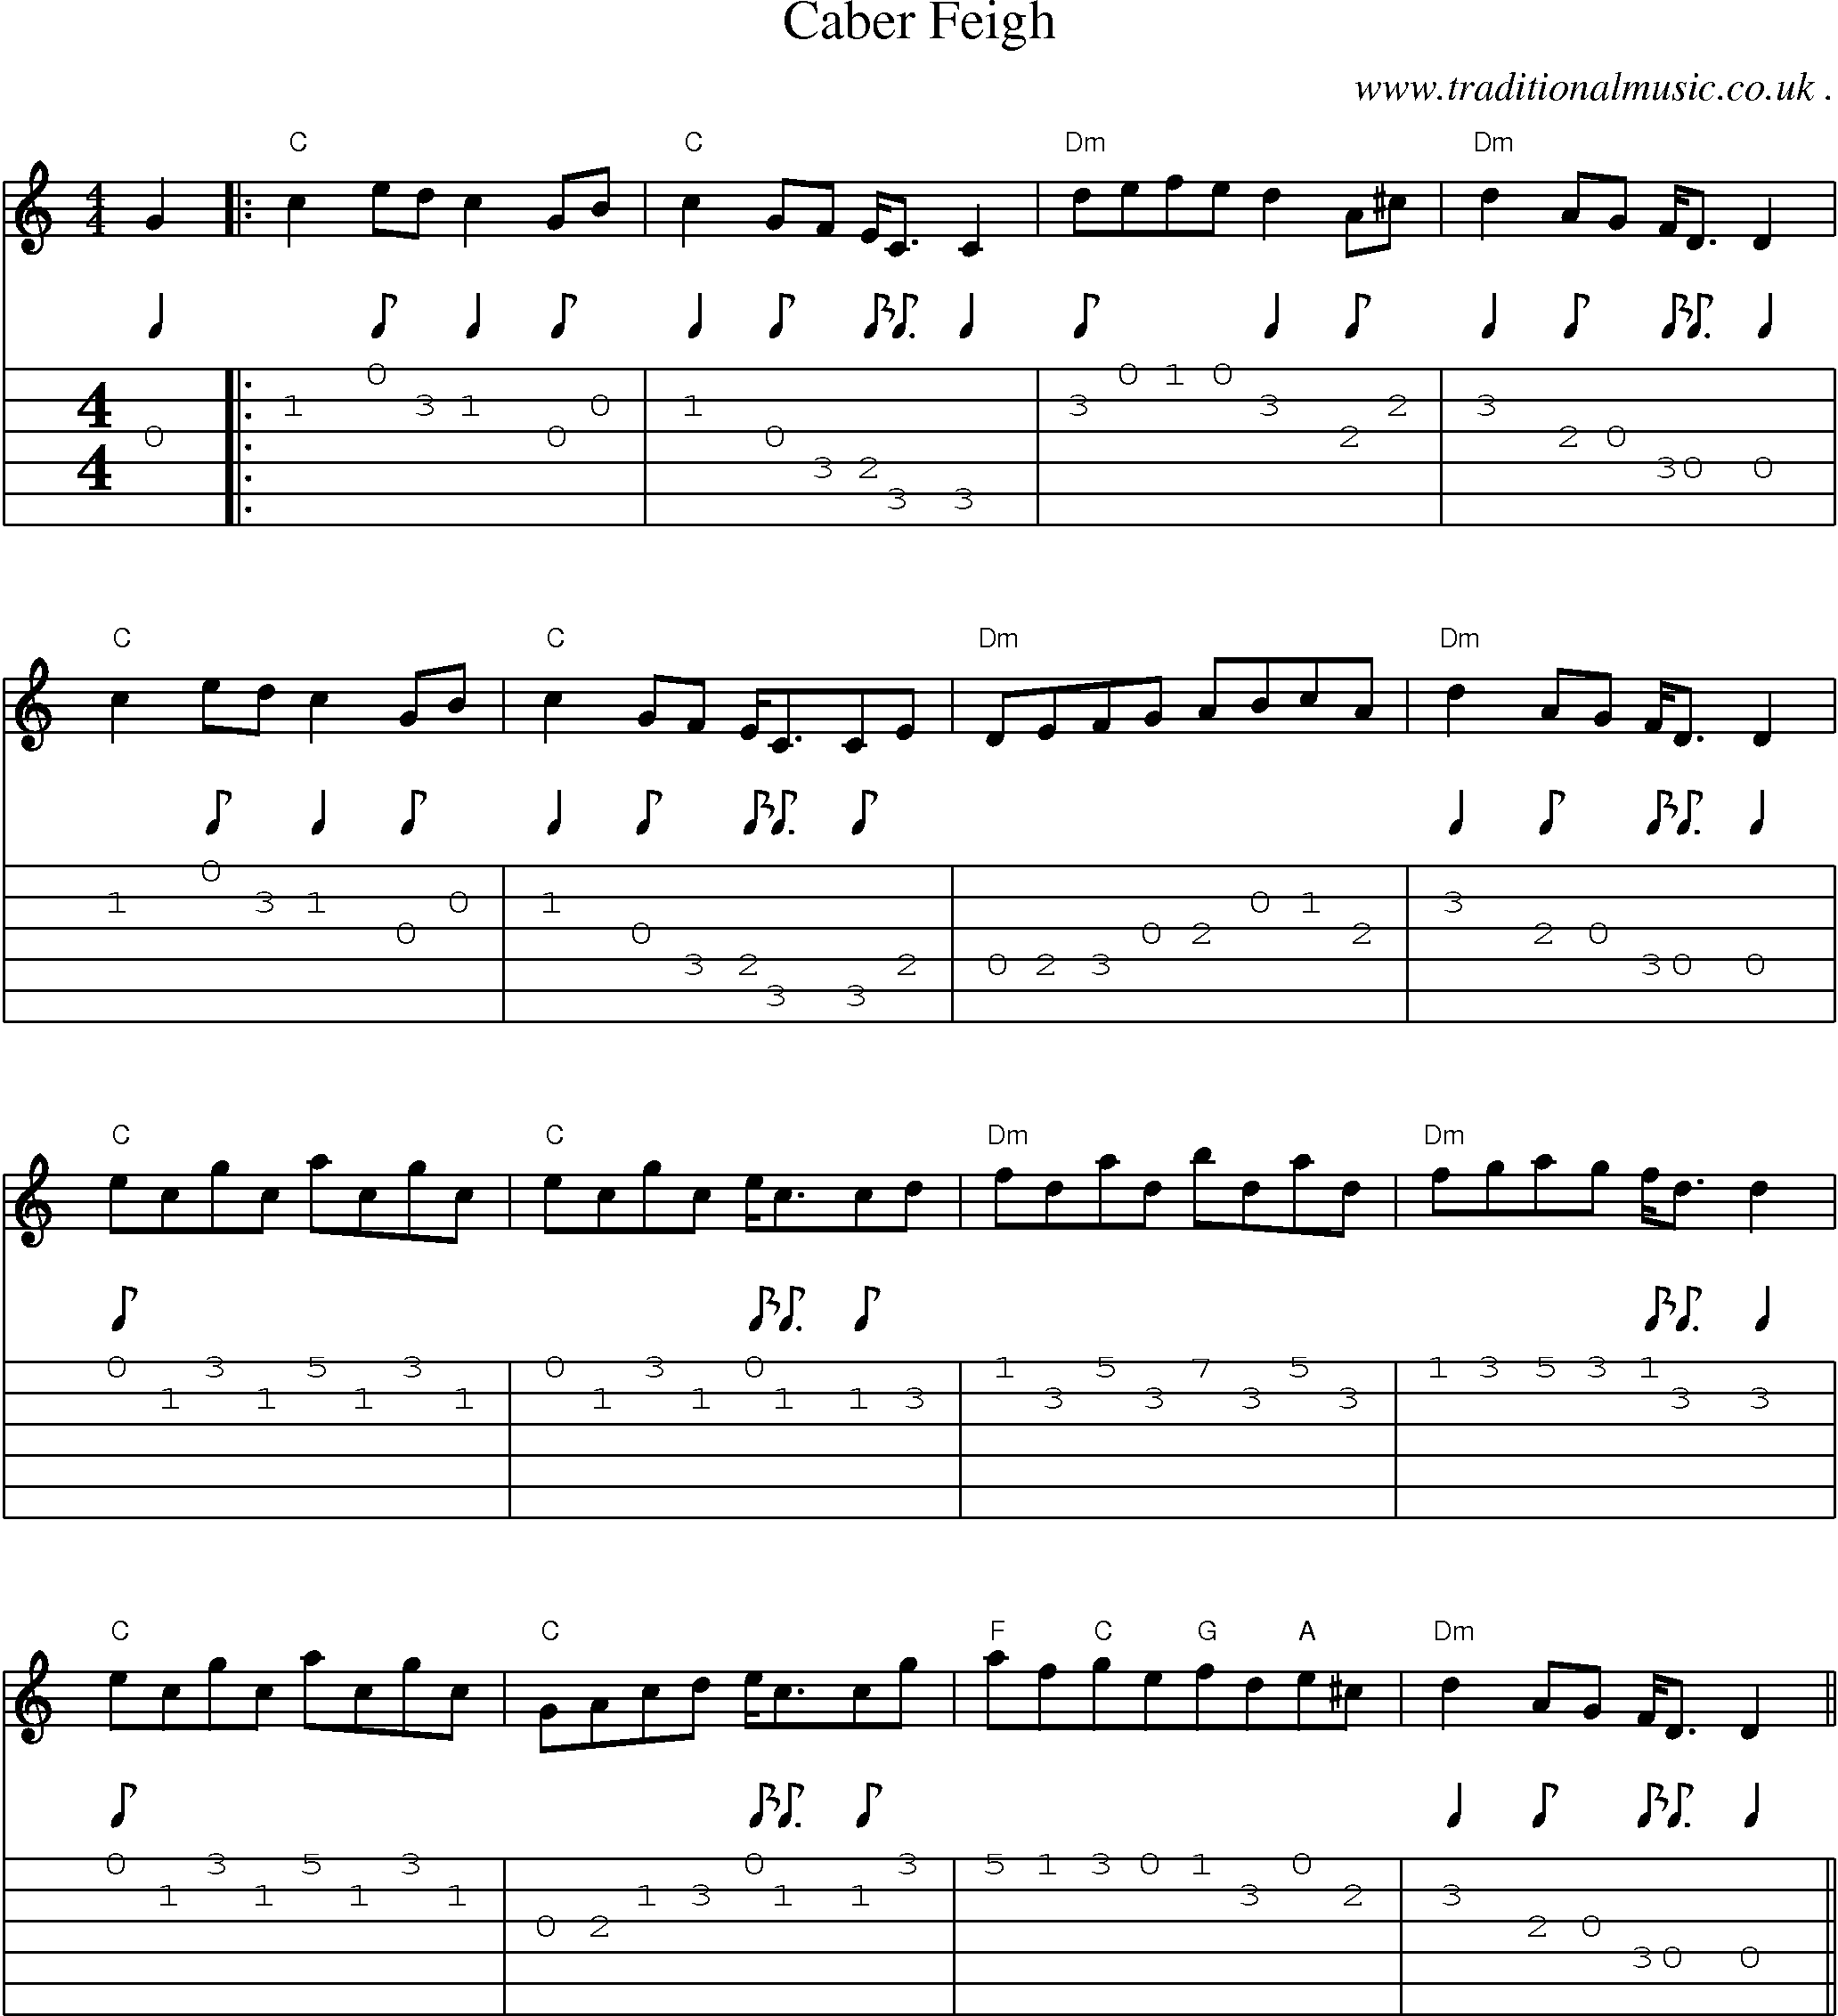 Sheet-Music and Guitar Tabs for Caber Feigh